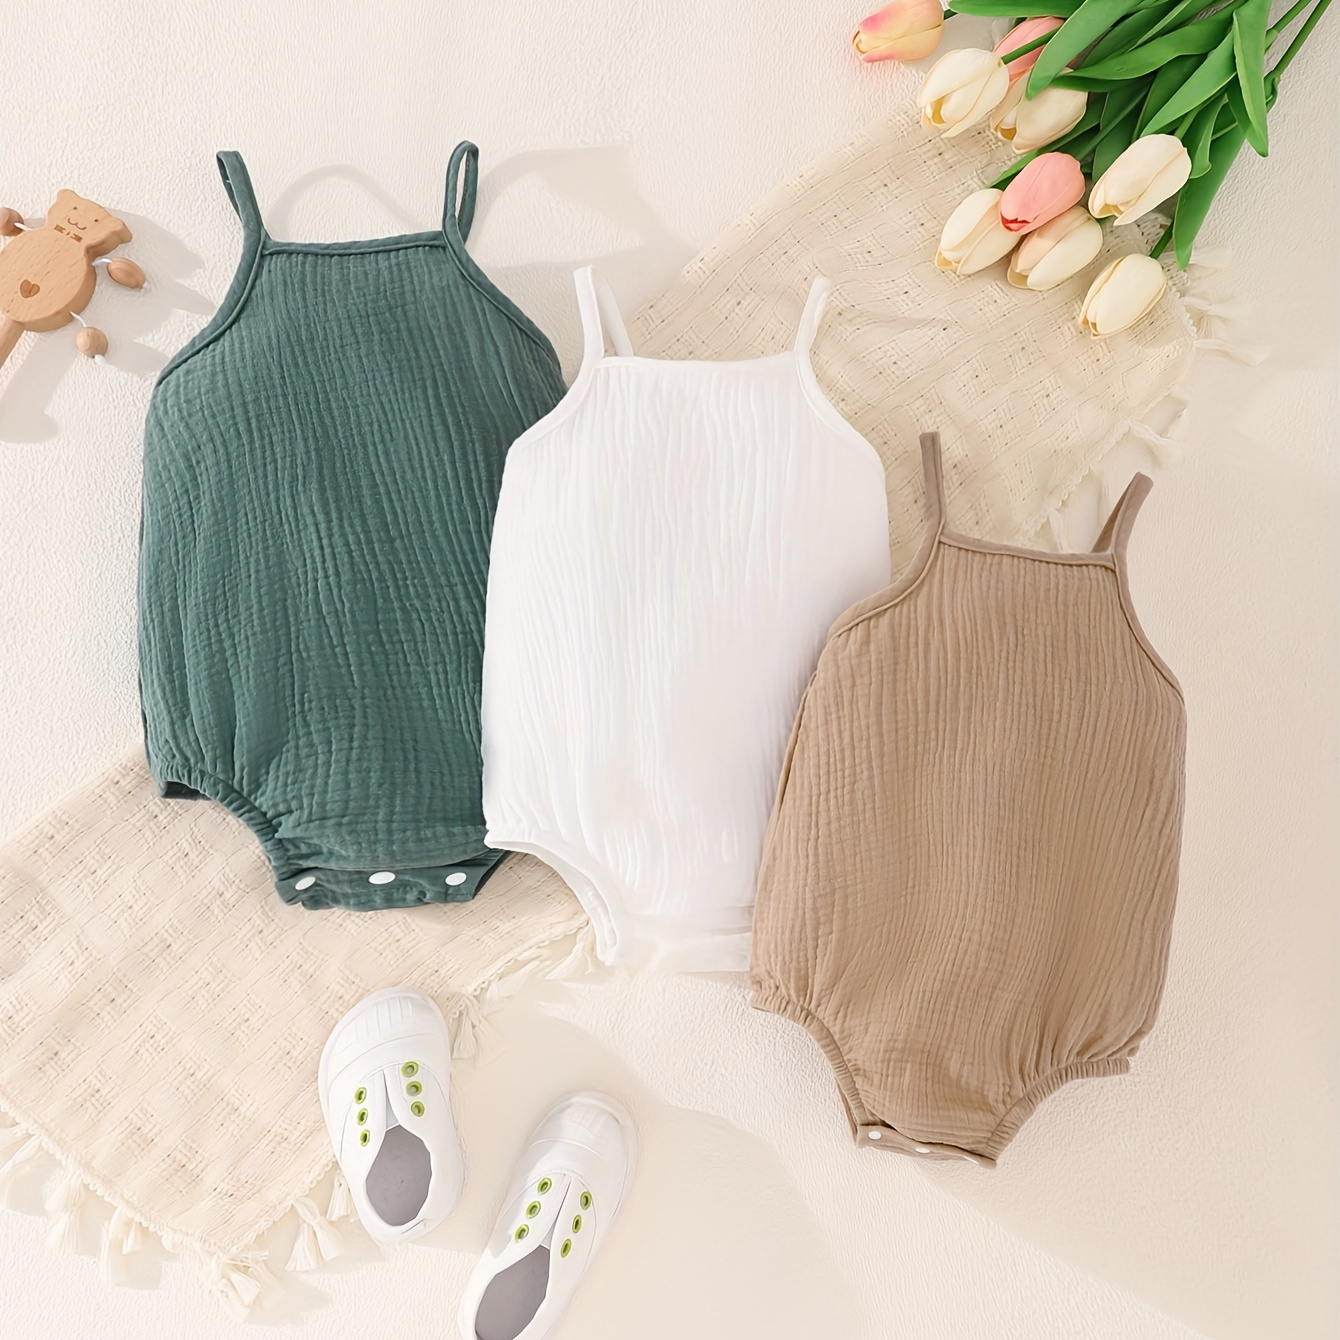 

3pcs Baby's Solid Color Muslin Triangle Bodysuit, Casual Comfy Sleeveless Romper, Toddler & Infant Girl's Onesie For Summer, As Gift